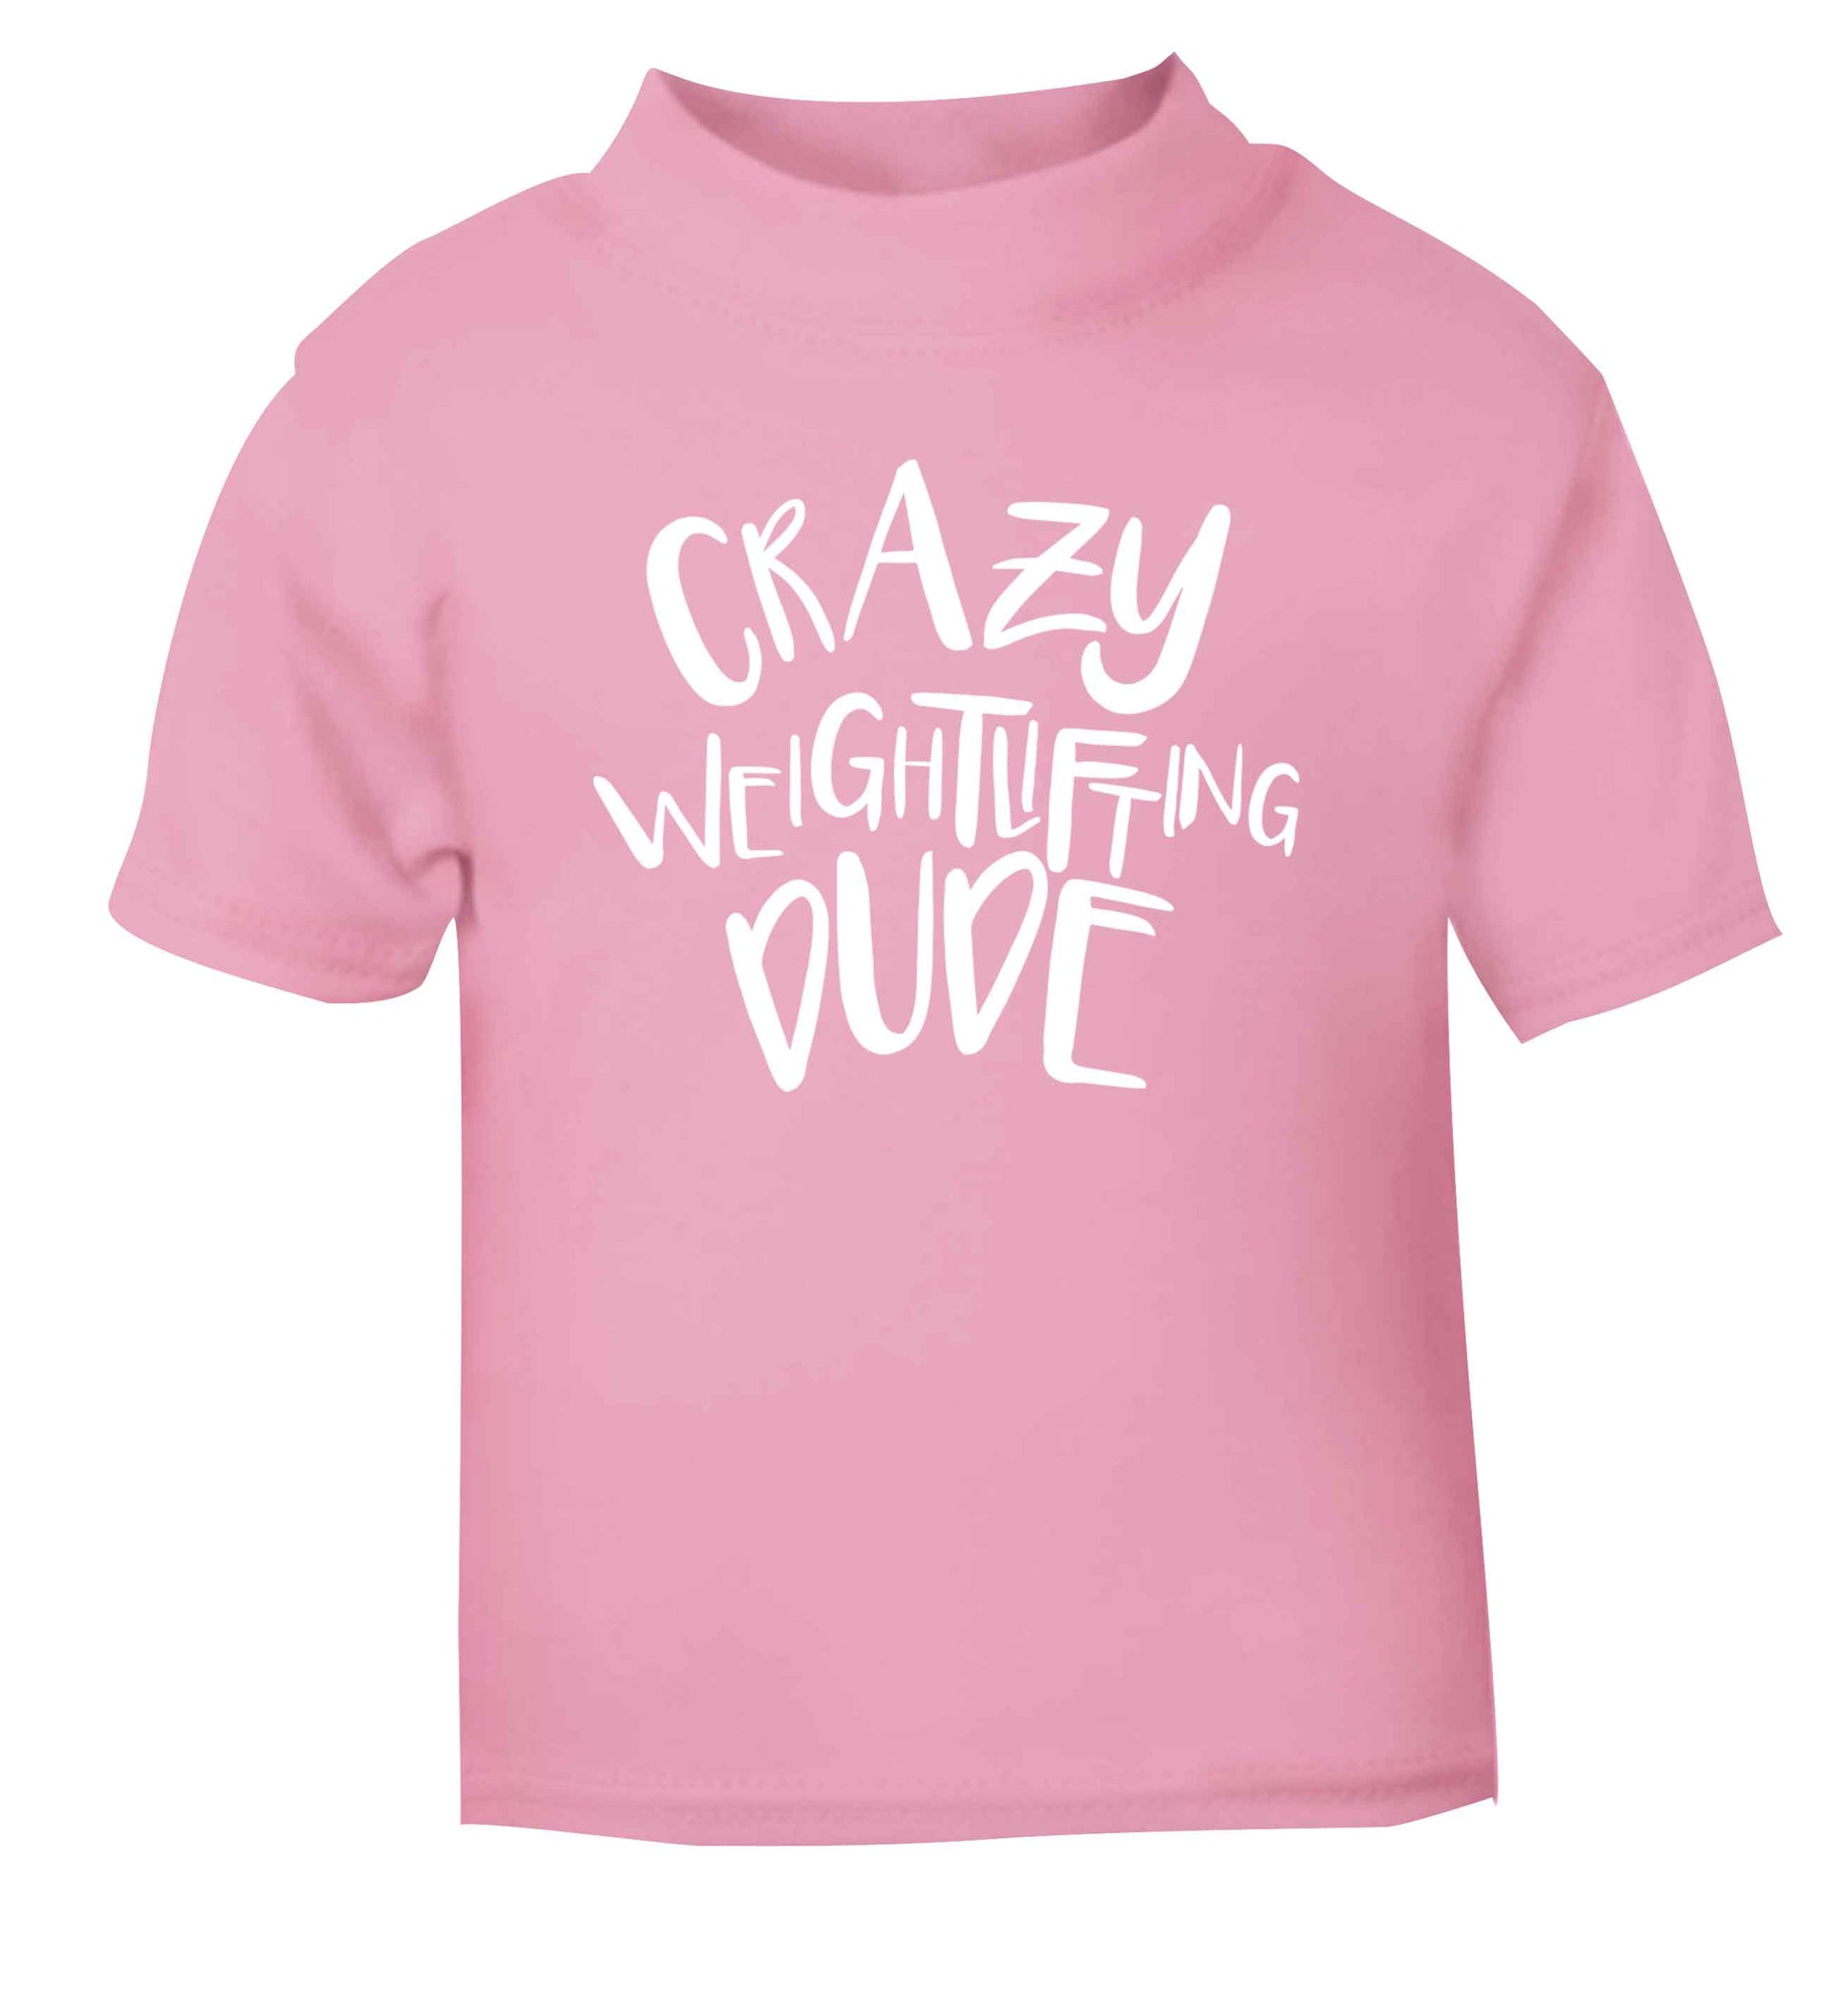 Crazy weightlifting dude light pink Baby Toddler Tshirt 2 Years